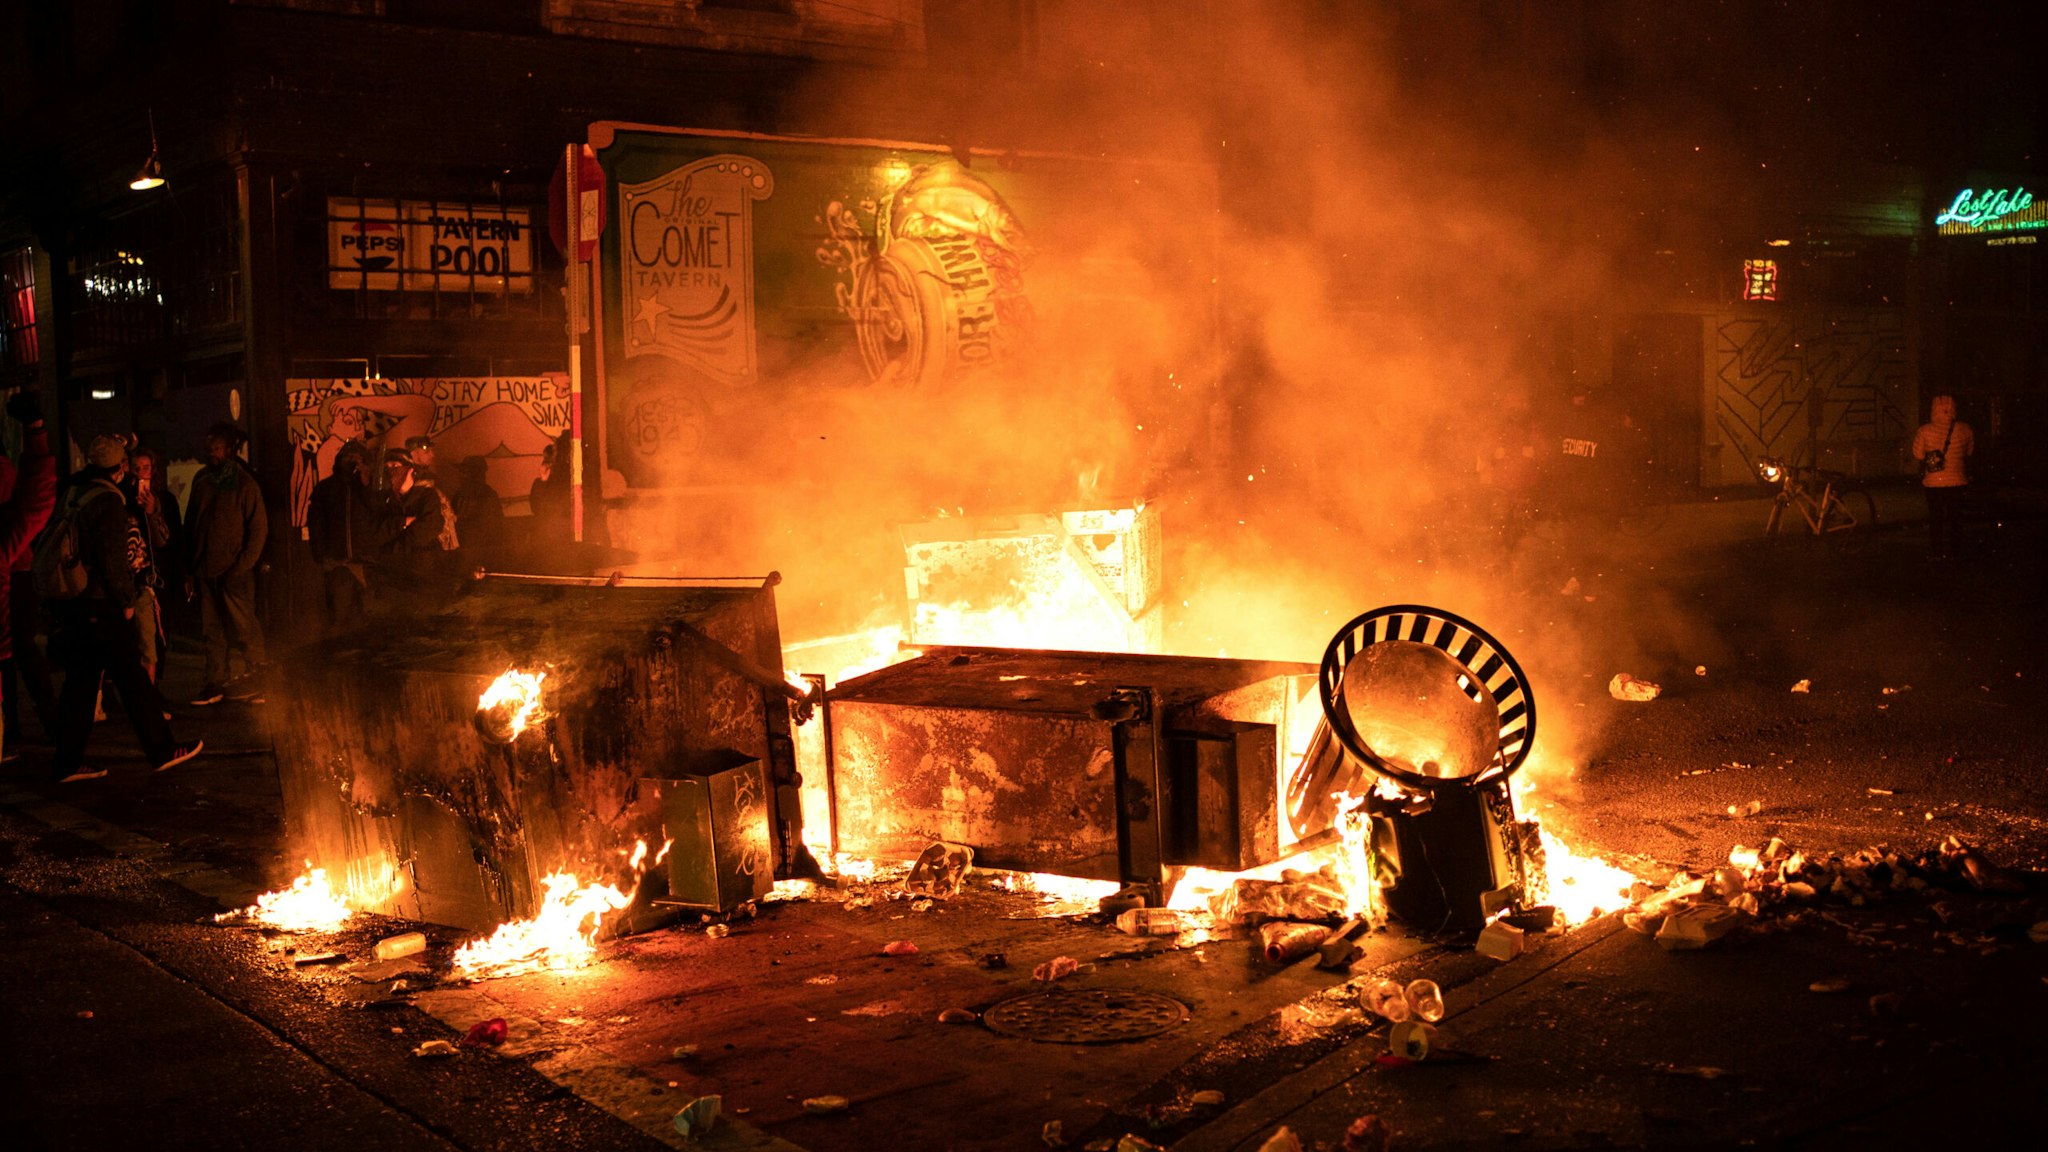 SEATTLE, WA - JUNE 08: A fire burns in the street after demonstrators clashed with law enforcement near the Seattle Police Departments East Precinct shortly after midnight on June 8, 2020 in Seattle, Washington. Earlier in the evening, a suspect drove into the crowd of protesters and shot one person, which happened after a day of peaceful protests across the city. Later, police and protesters clashed violently during ongoing Black Lives Matter demonstrations following the death of George Floyd.